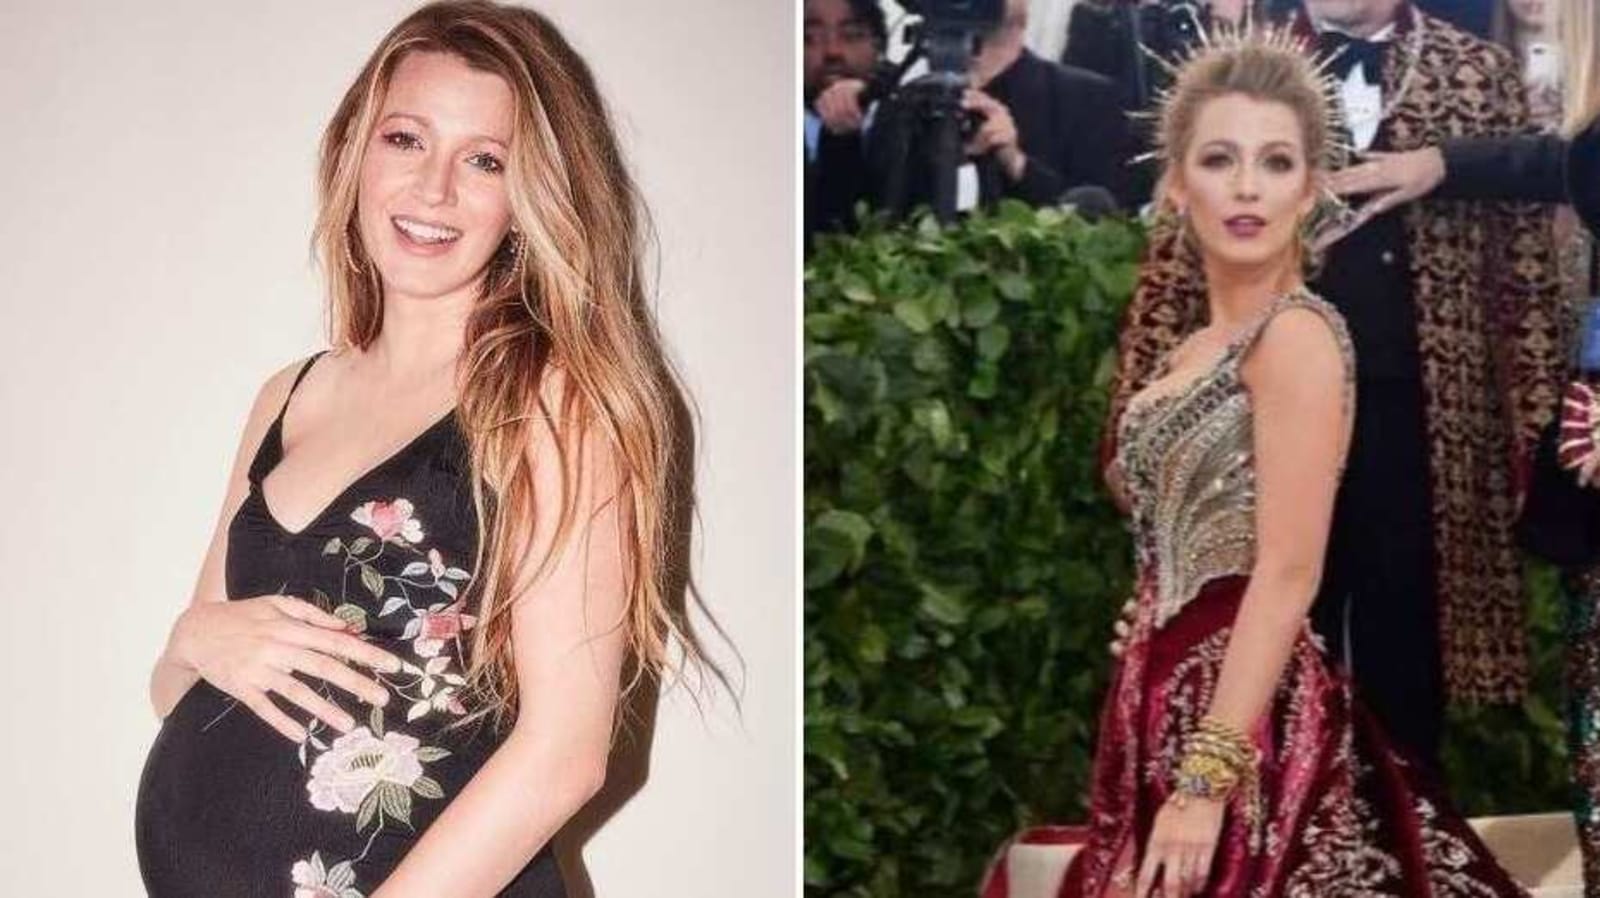 Blake Lively talks about women's relationship with their bodies